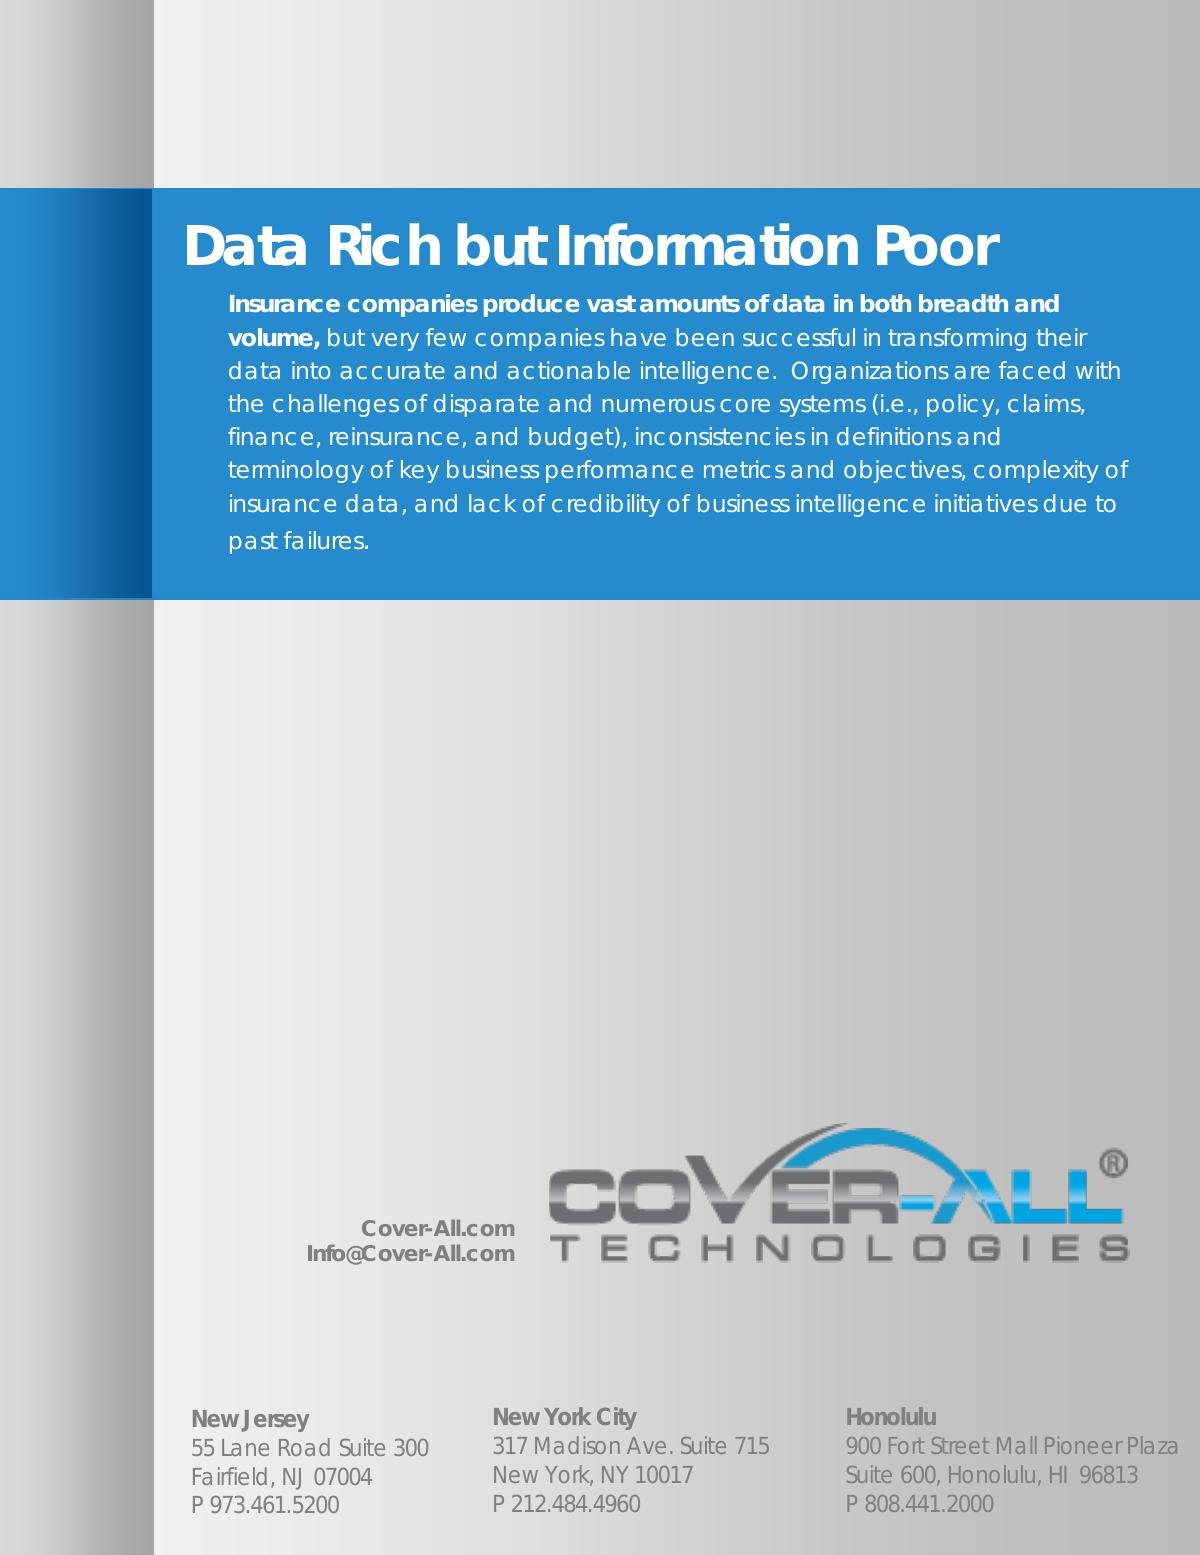 Data Rich but Information Poor